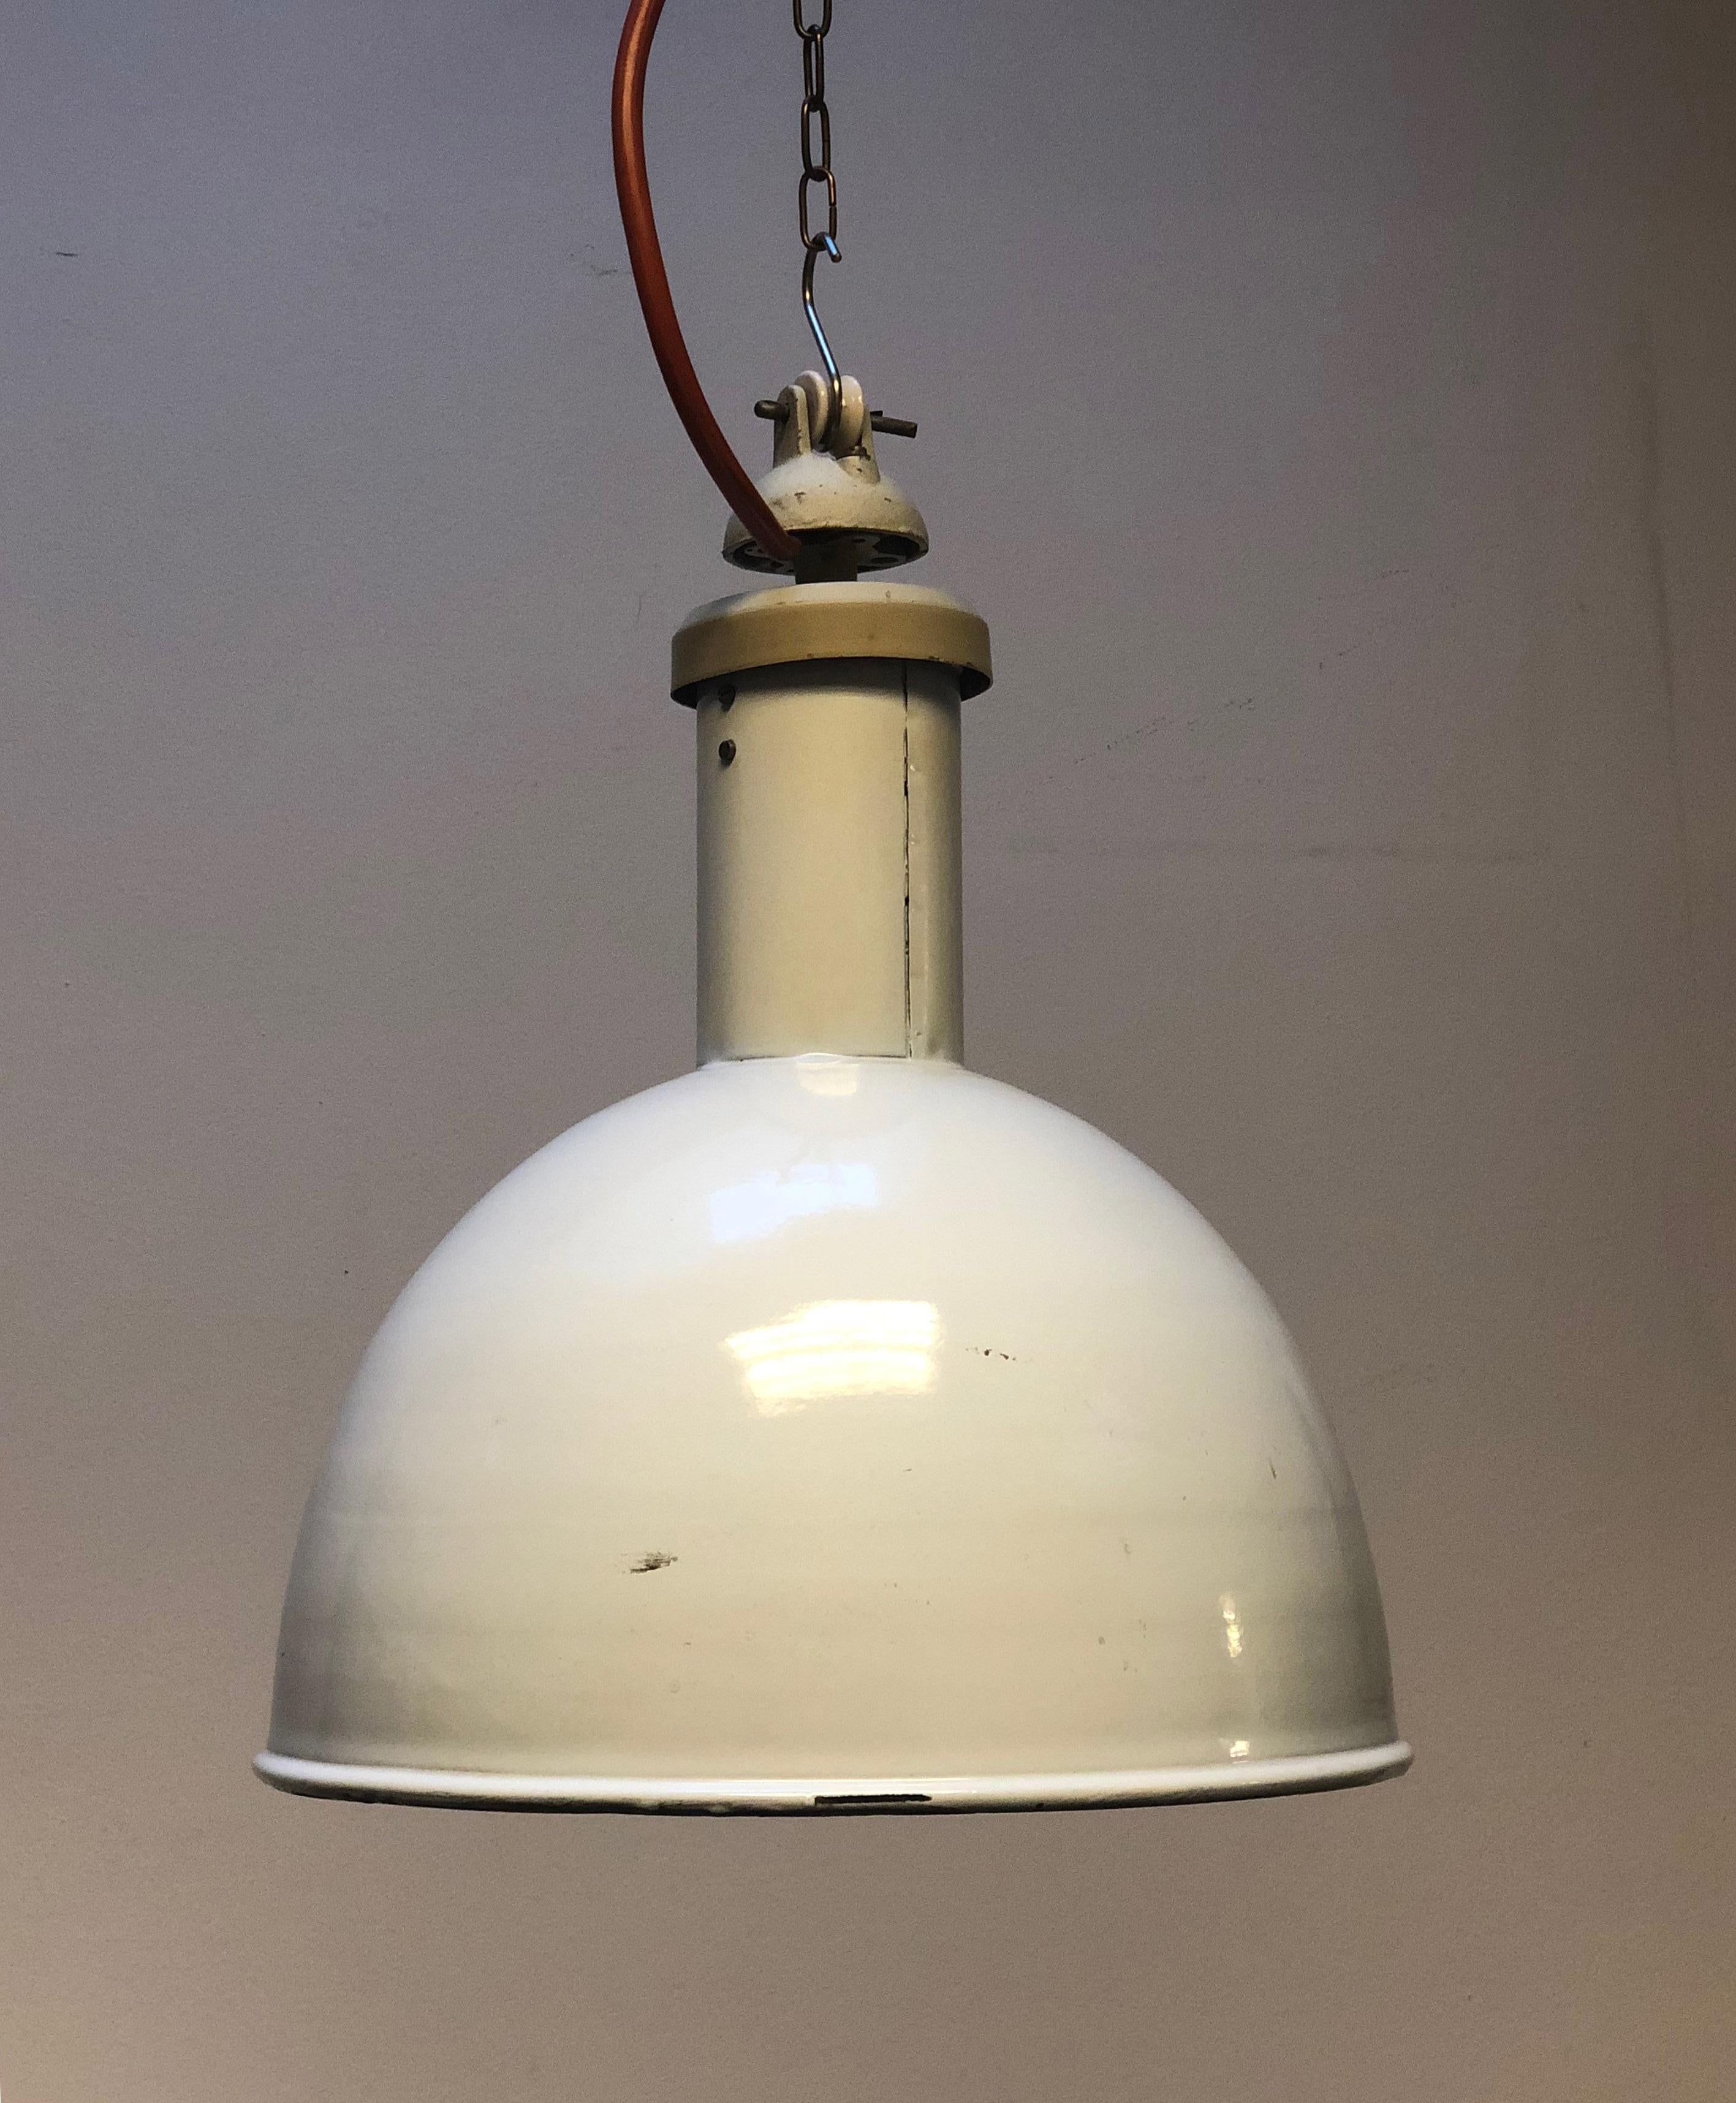 Austrian industrial pendants with white enameled steel screen from the 1950s.
Dimensions:
Height approximately 57cm, Ø 40 cm.
Up to five pieces available.